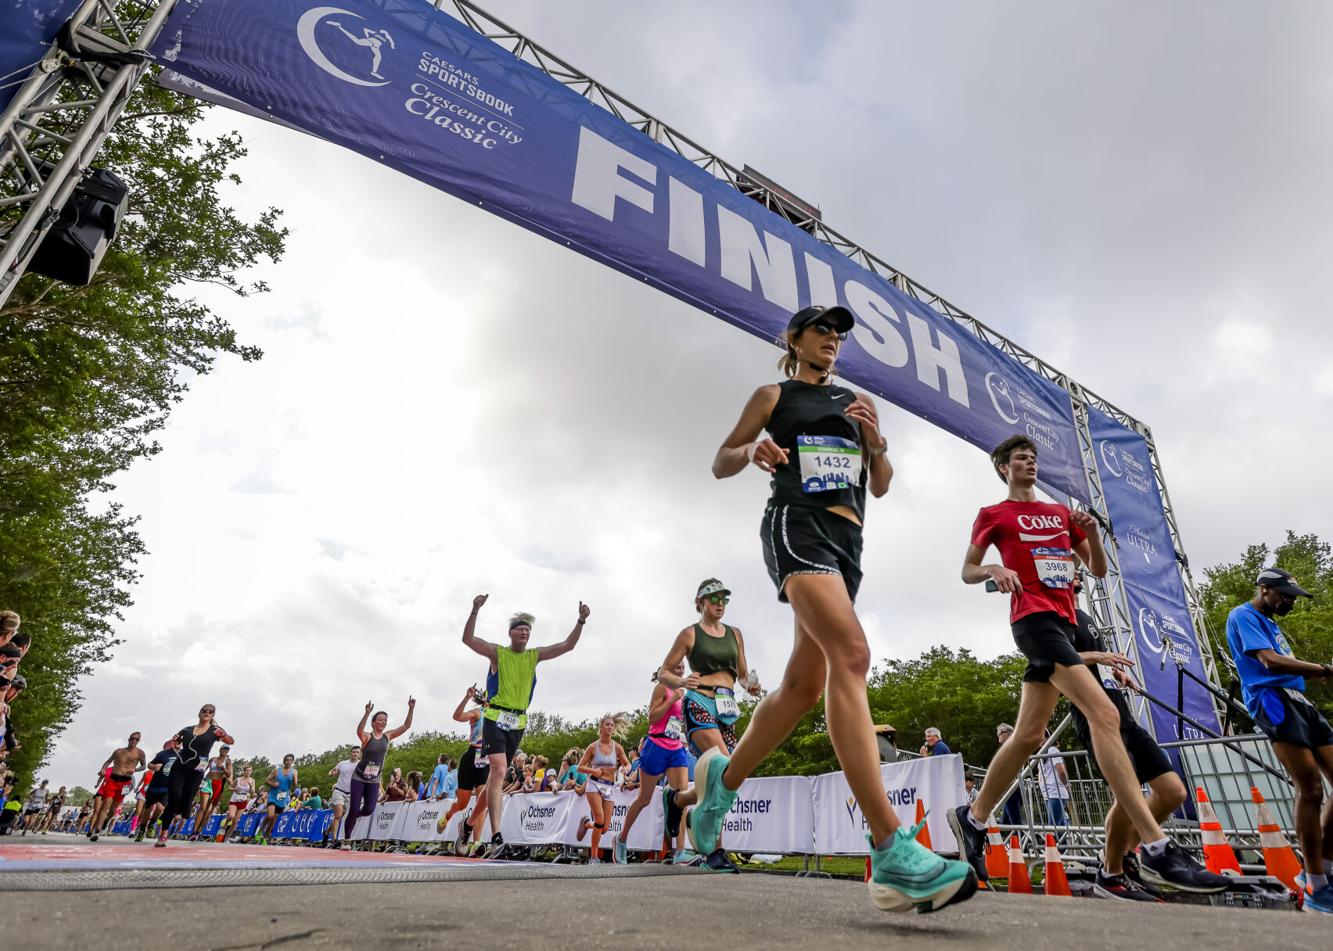 Photos The Crescent City Classic 10k race returns to in person